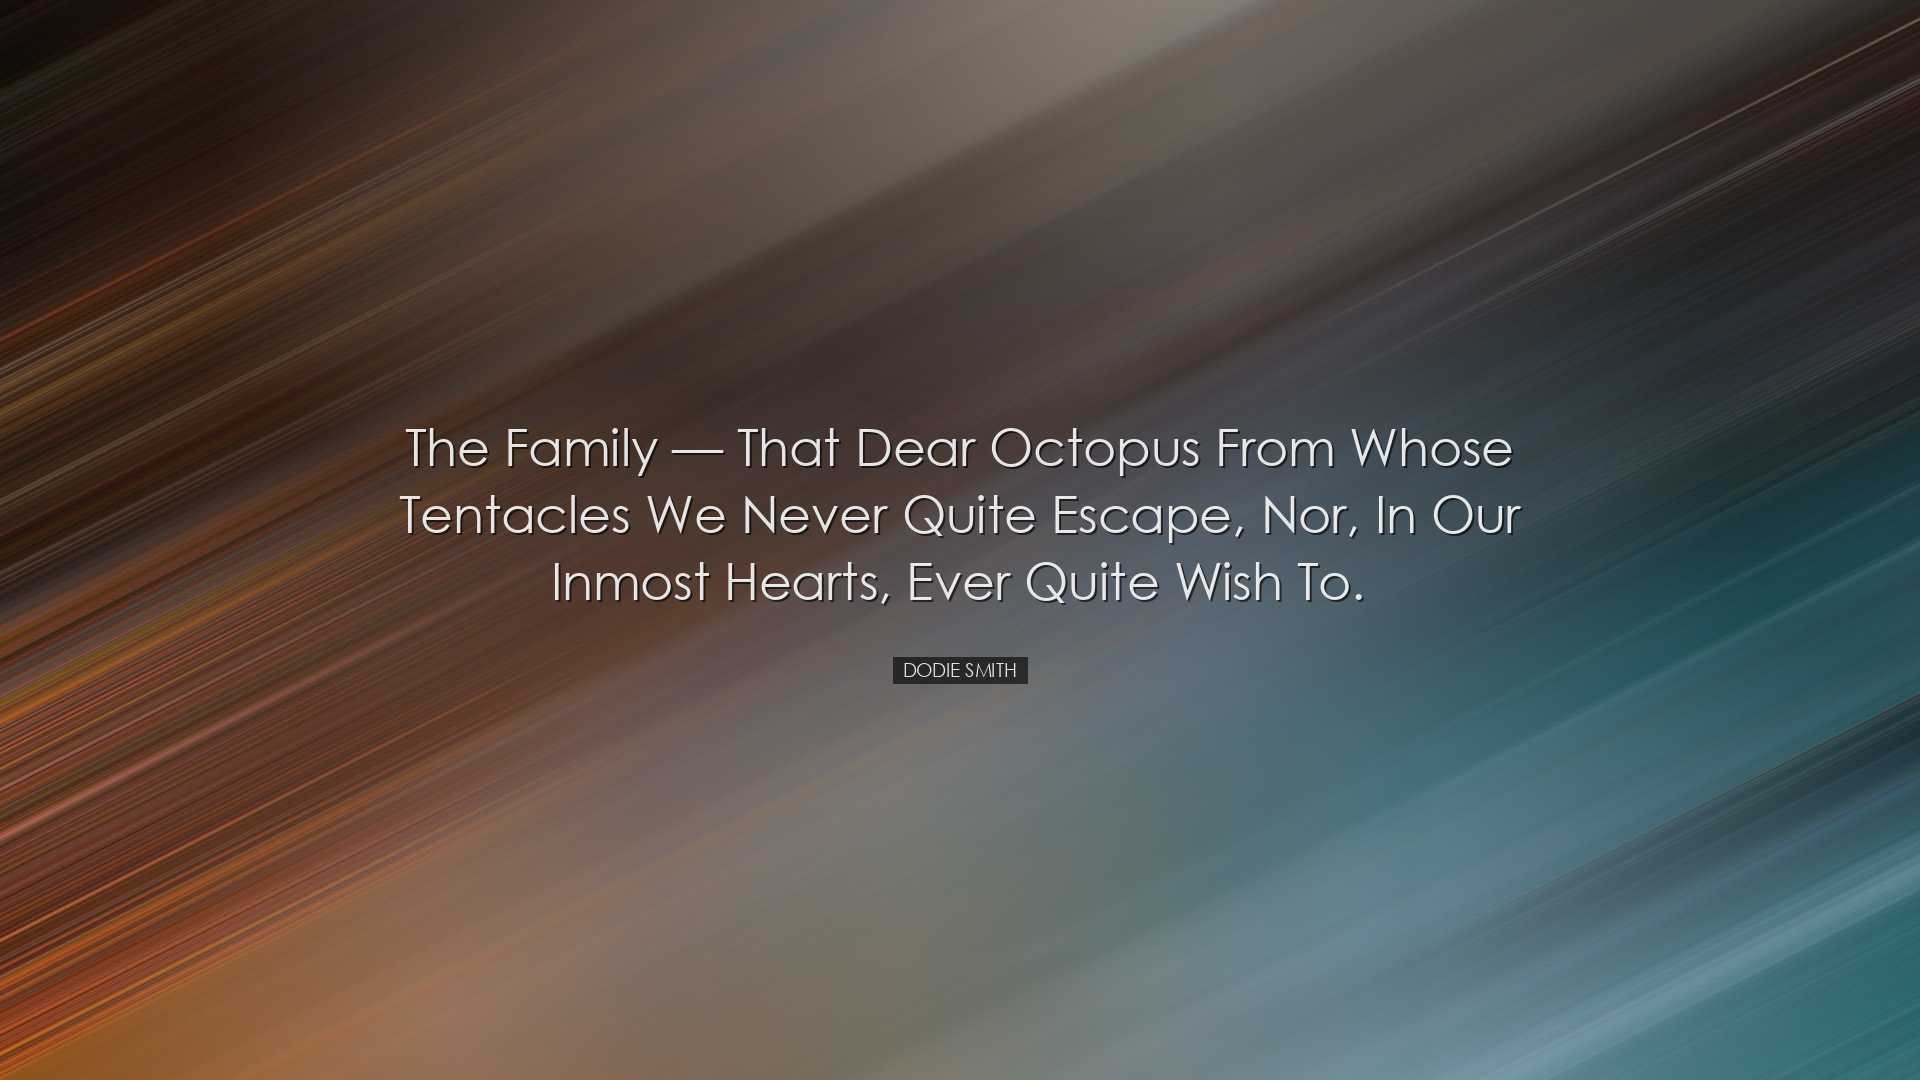 The family — that dear octopus from whose tentacles we never